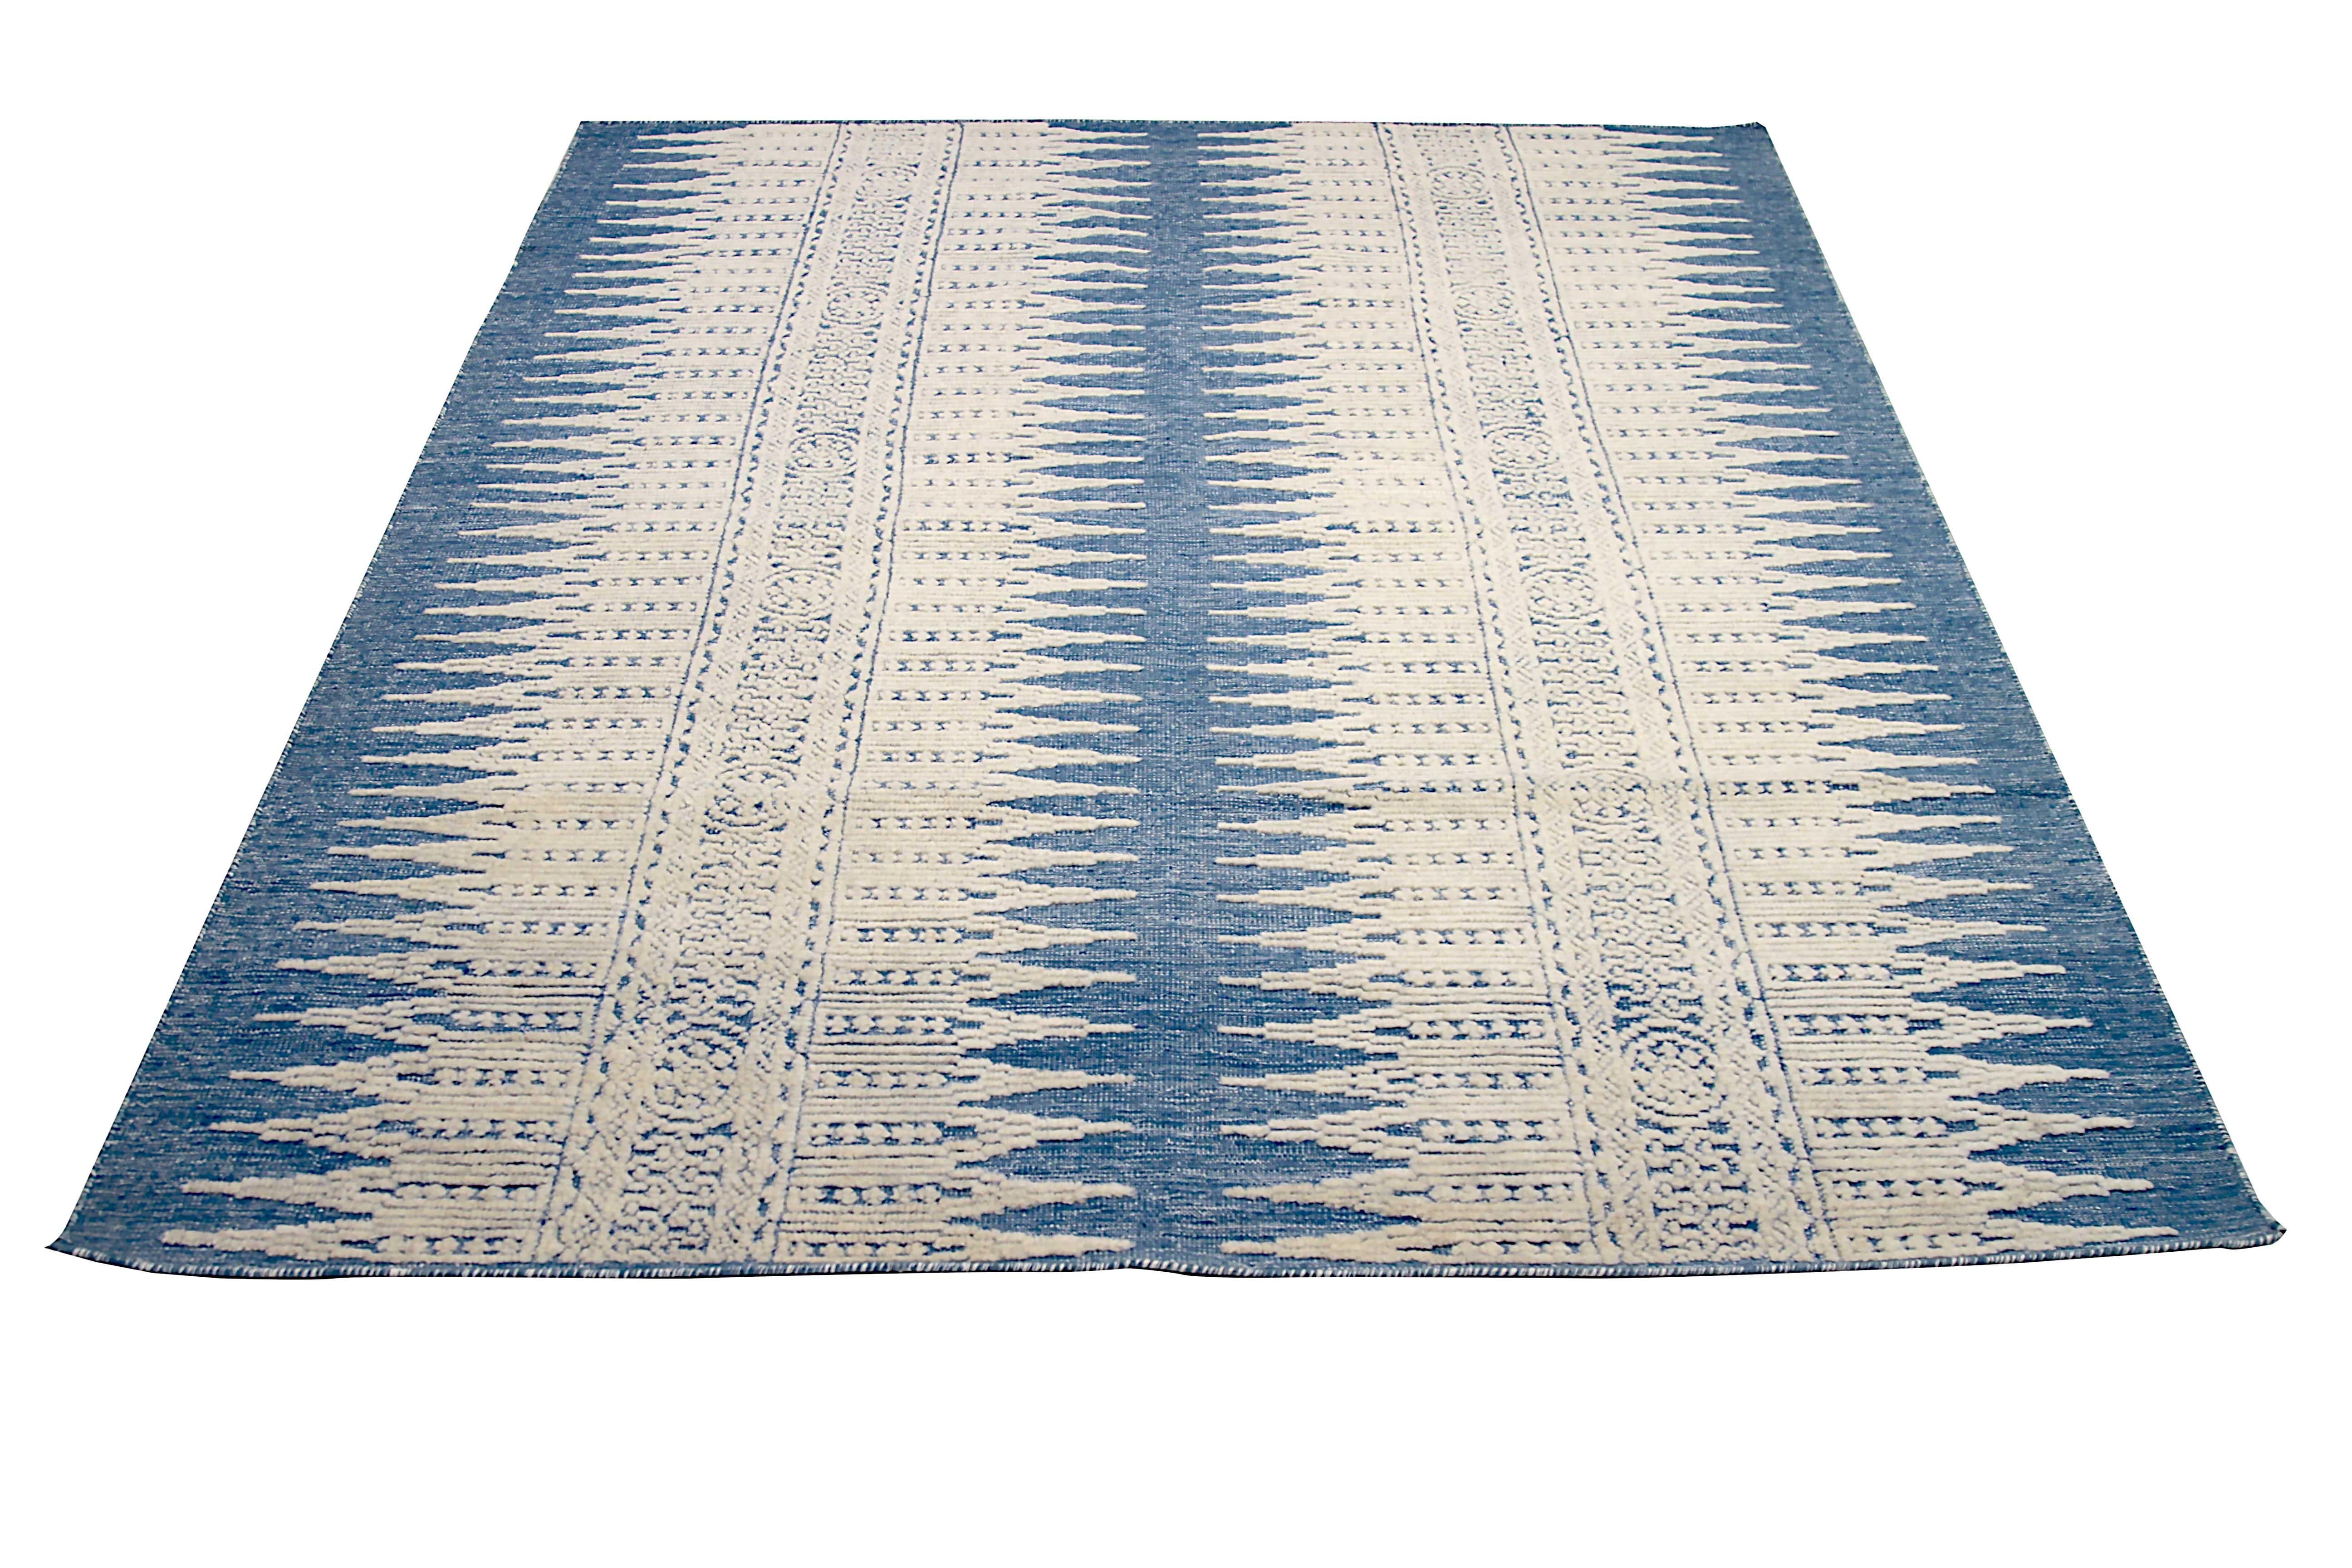 New area rug handwoven from the finest sheep’s wool. It’s colored with all-natural vegetable dyes that are safe for humans and pets. It has a nice 6’ x 8’ dimension that works perfectly in small to medium-sized rooms. 

Cameron Collection is our